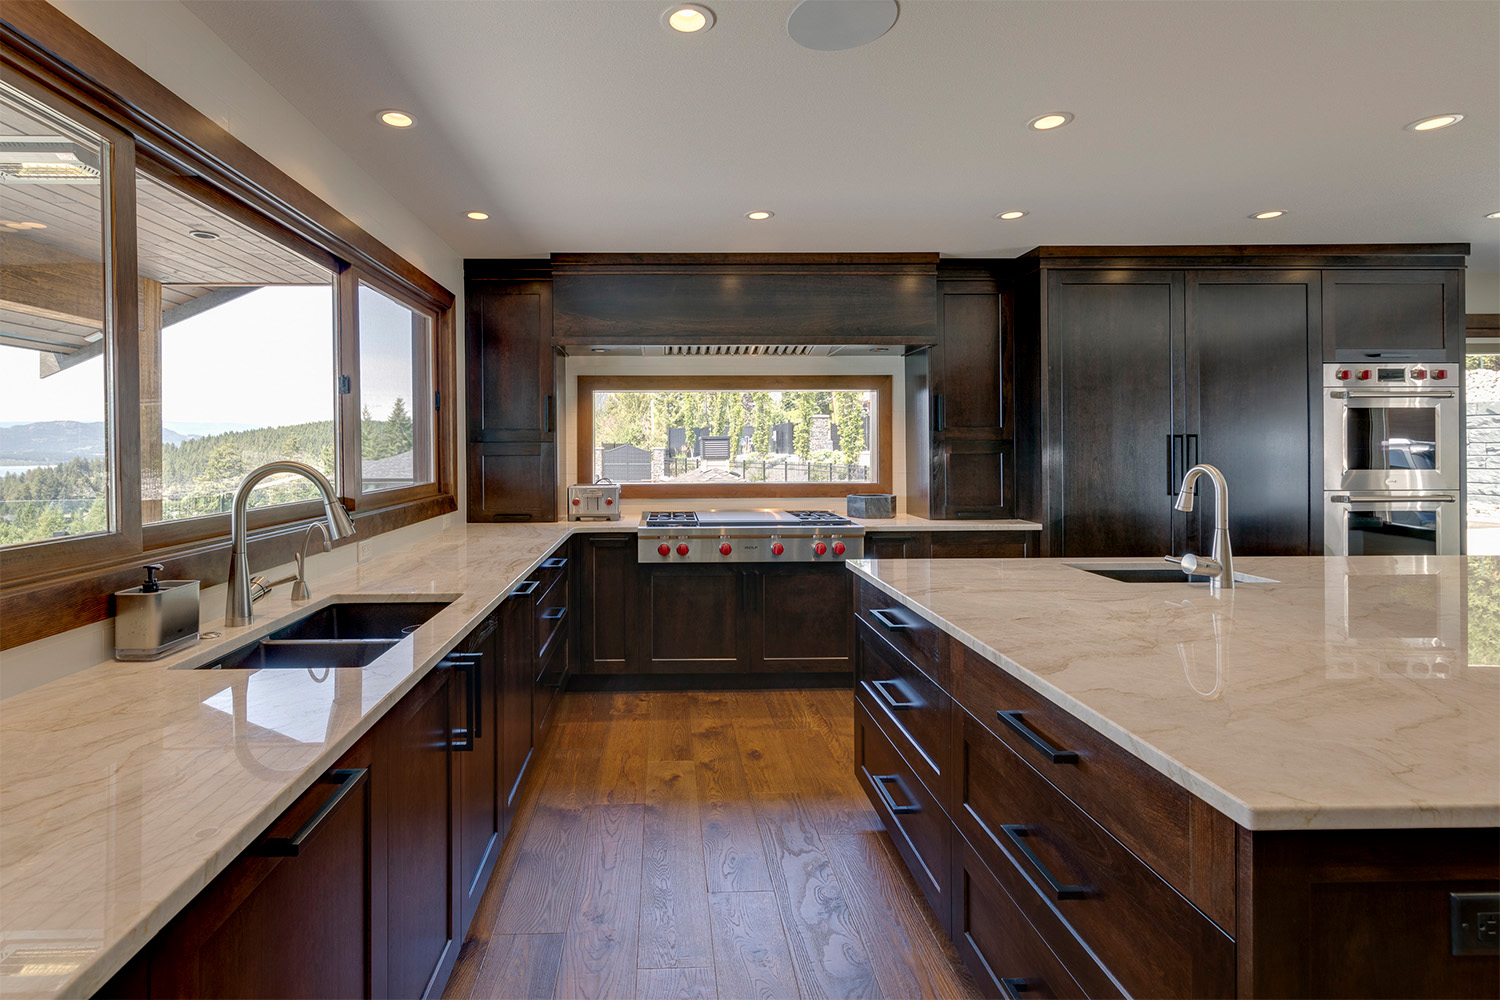 dark brown wood kitchen with large spacious marble countertops, stainless steel oven and gas stovetop